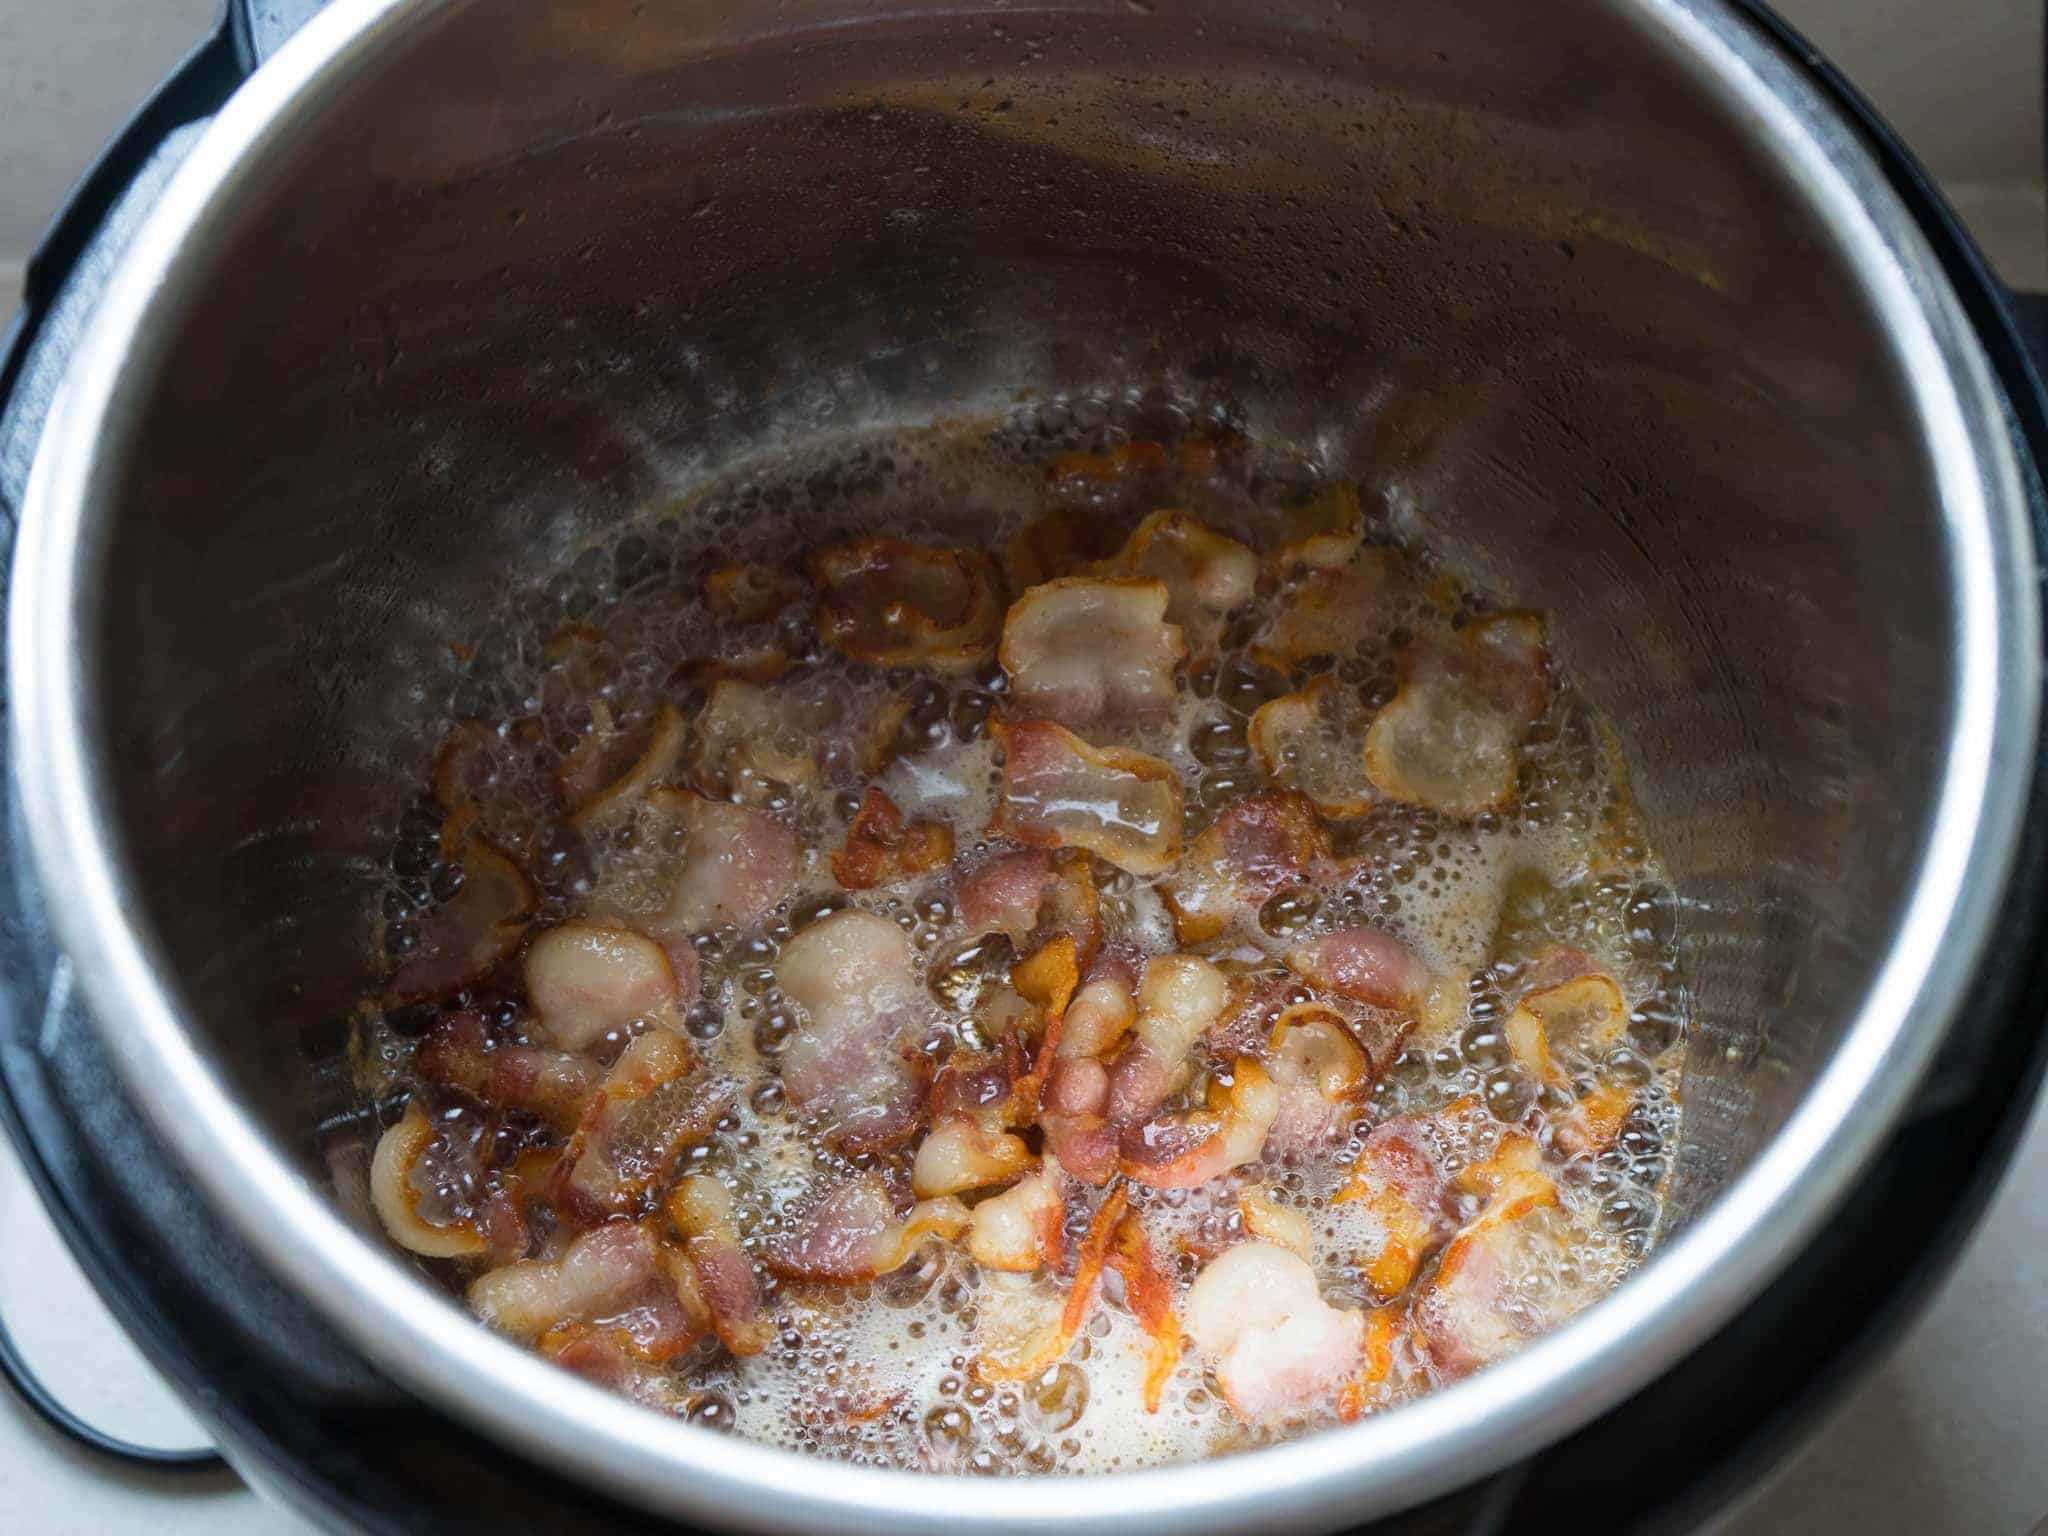 Bacon sizzling in an Instant Pot